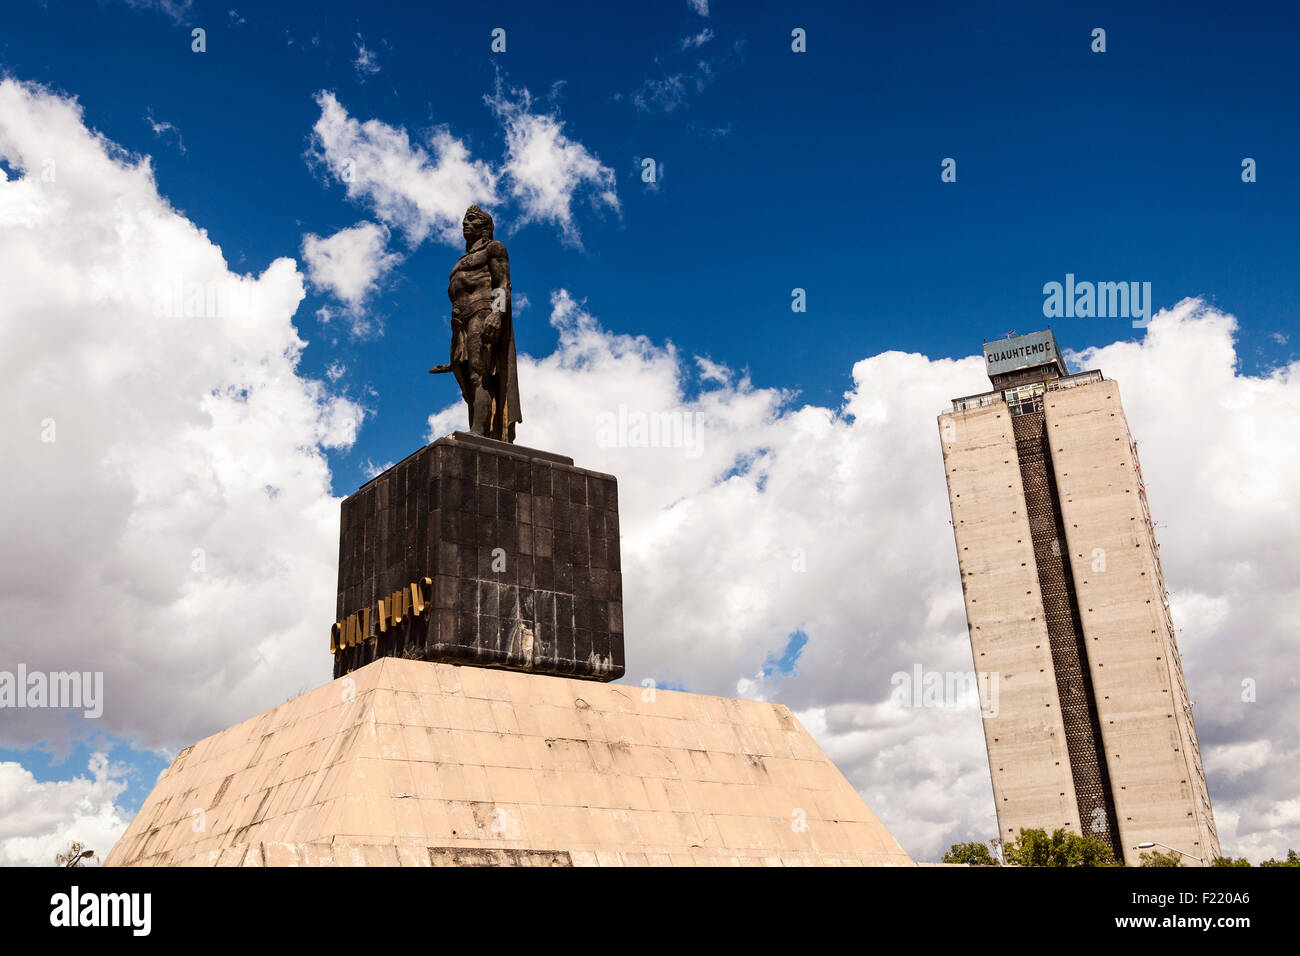 Monument to Cuitlahuac Mexico City Federal District DF North America Stock Photo